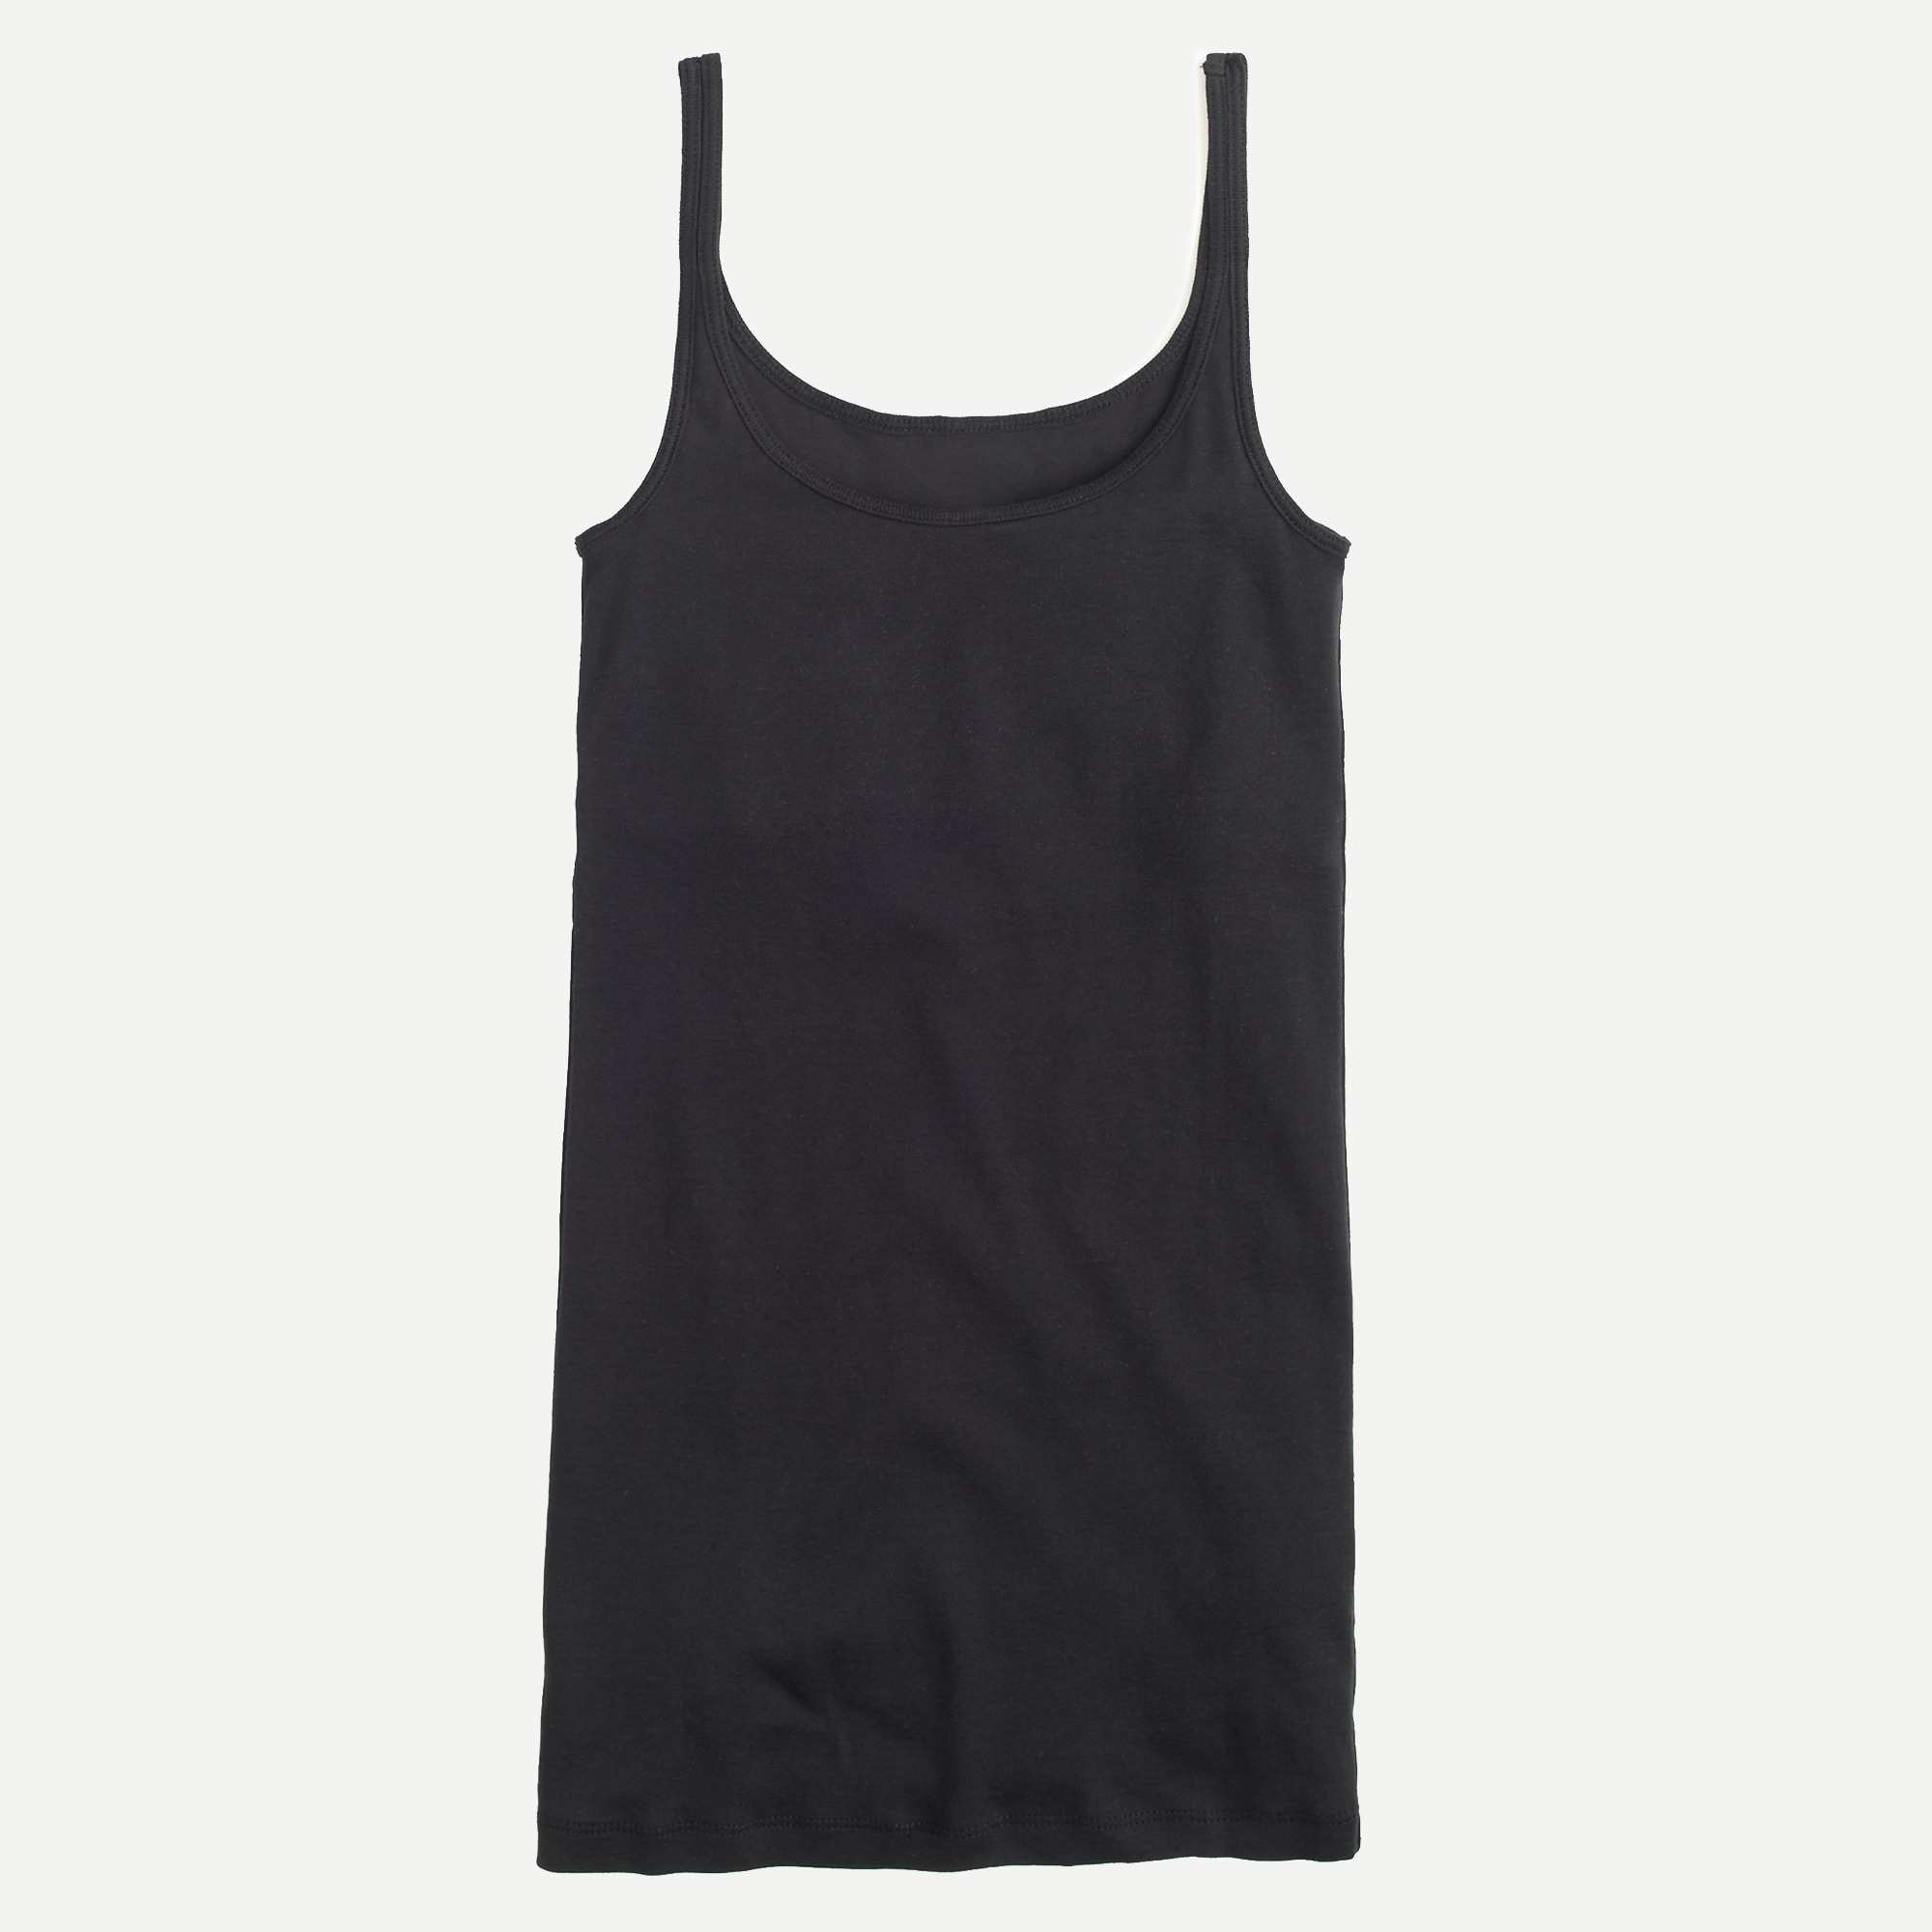 J.Crew: Slim Perfect Tank Top With Built-in Bra For Women